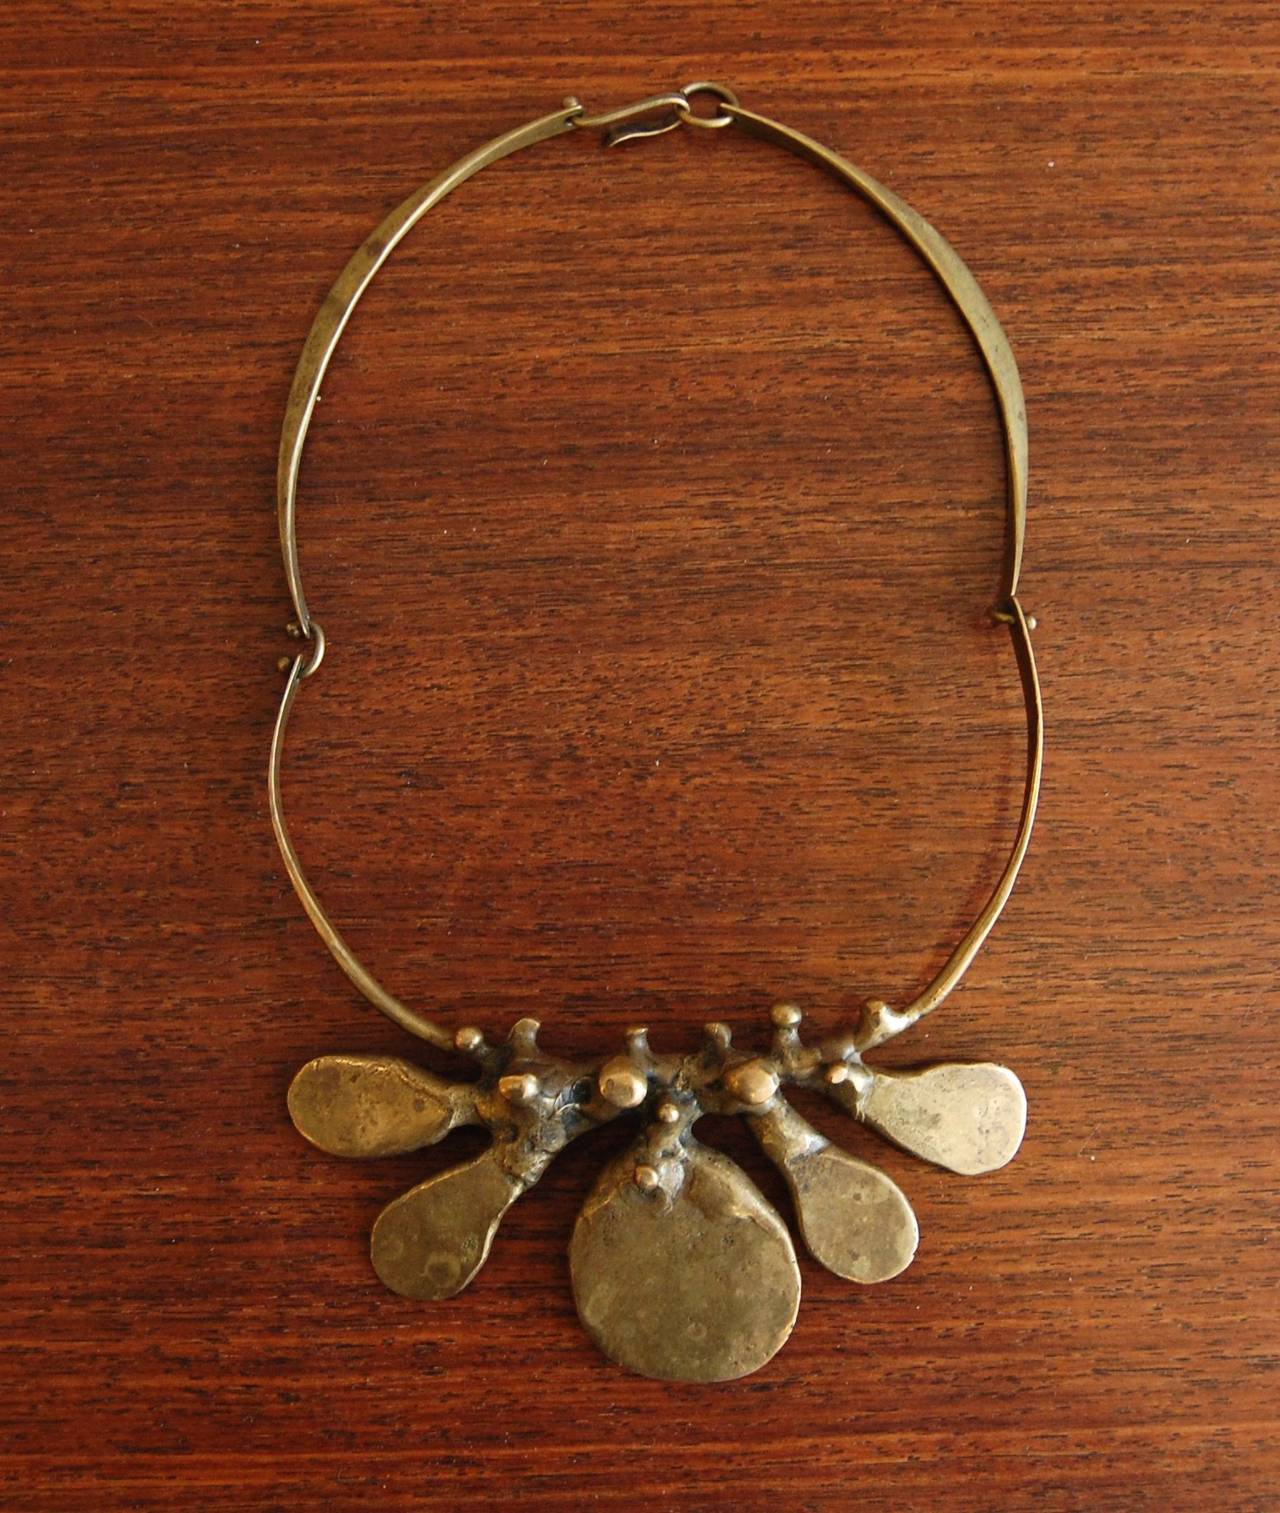 Bronze abstract necklace by San Diego artist / craftsman Jack Boyd. A noted metalsmith in both jewelry and sculpture, Boyd was a member of the Allied Craftsman a collective group of the best artists of San Diego of the 1950s and 60s. The bronze has